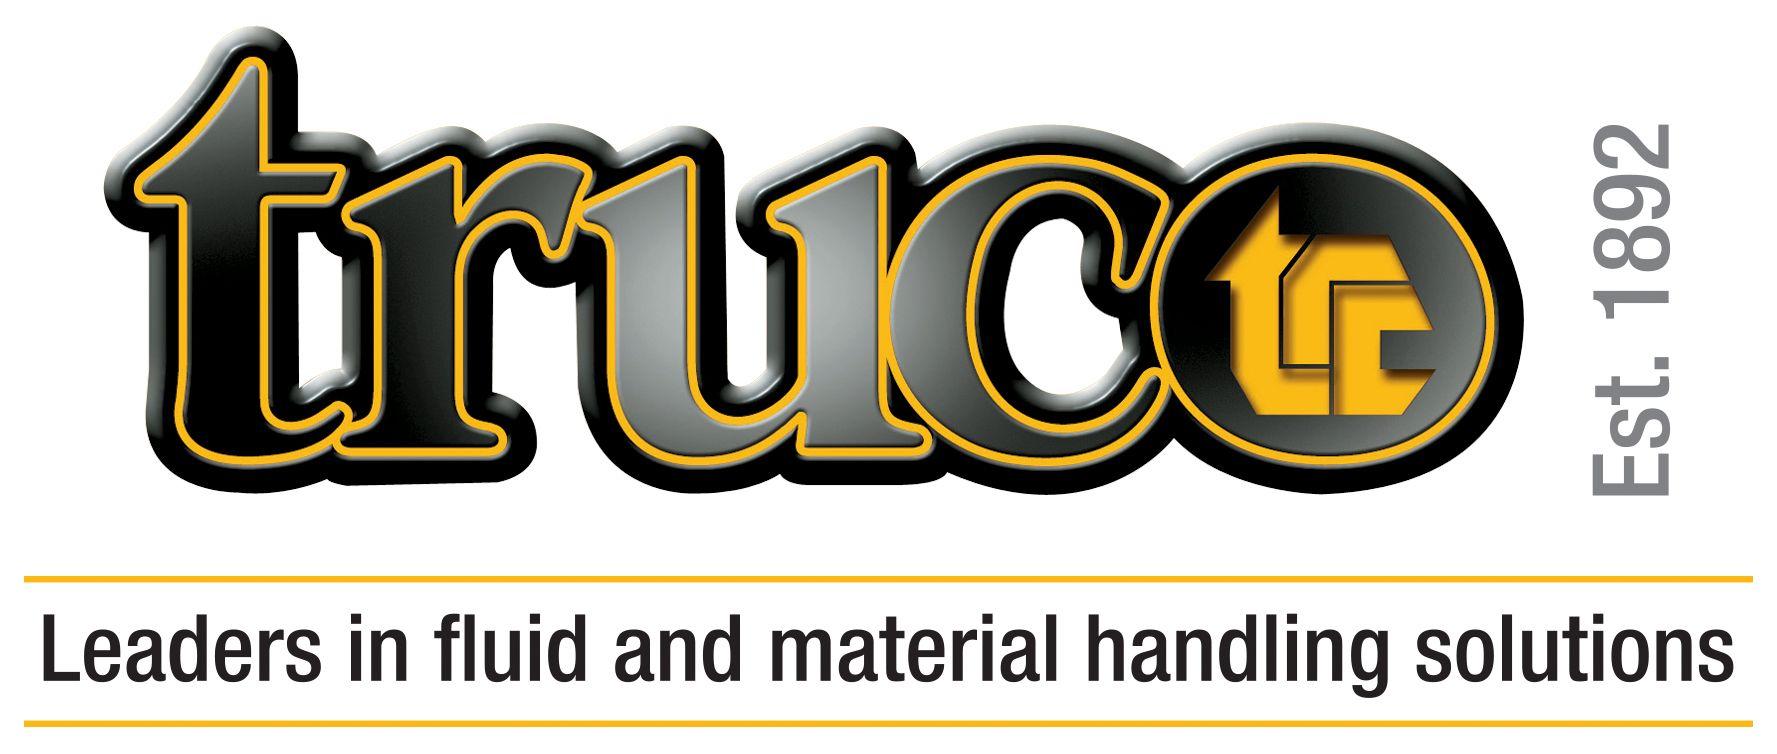 Truco Logo - Industrial Rubber Products